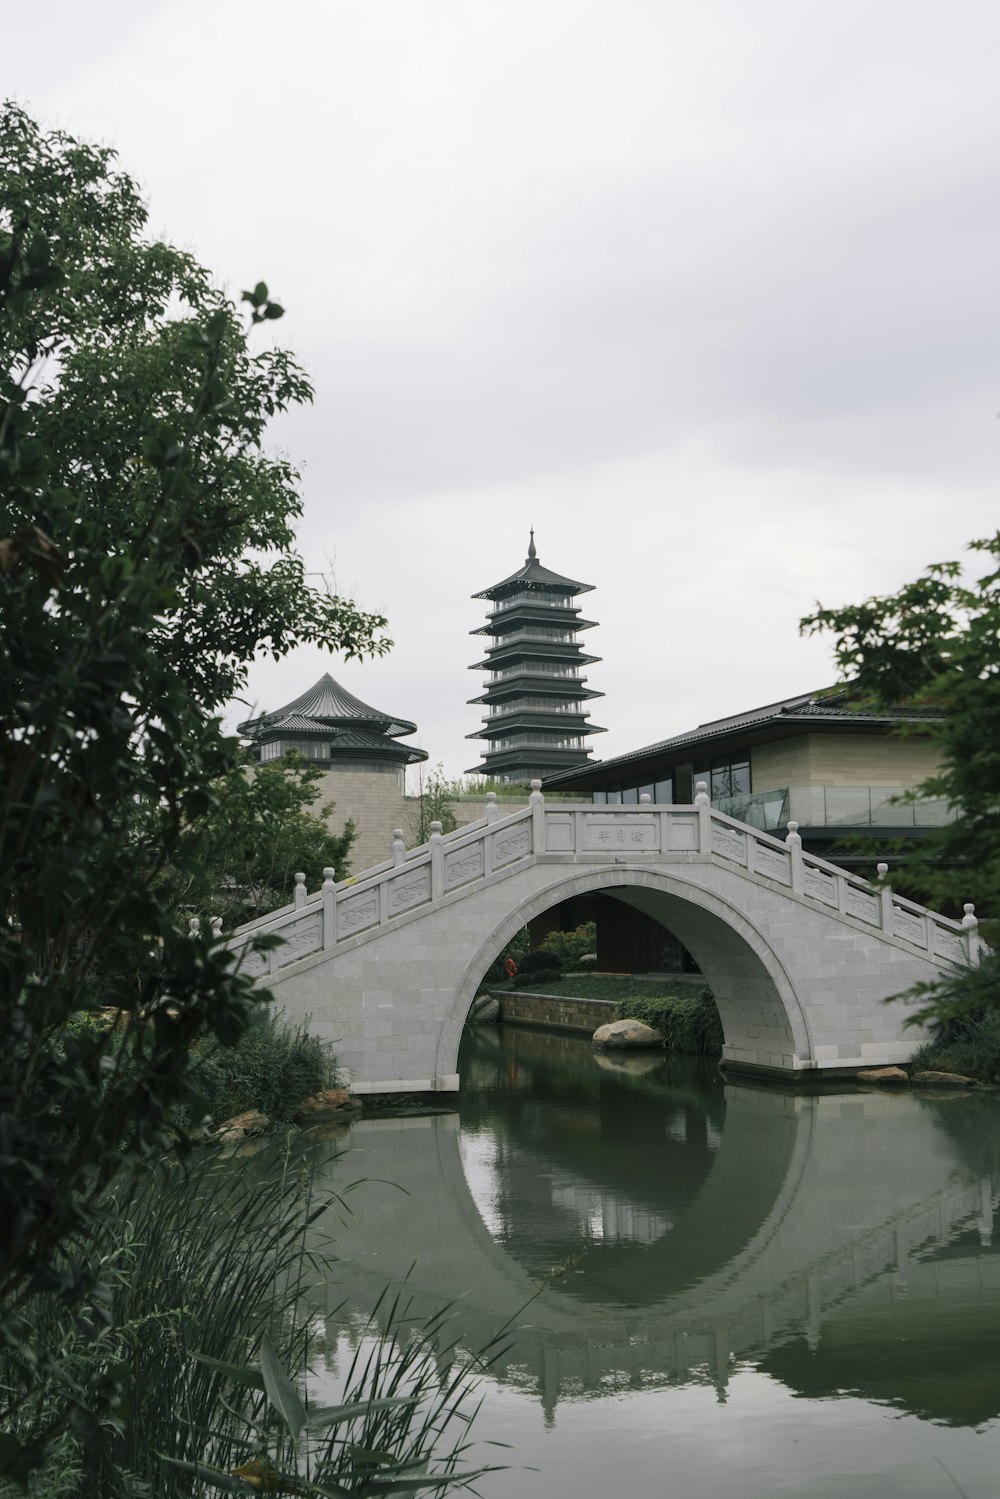 a bridge over a body of water with a pagoda in the background